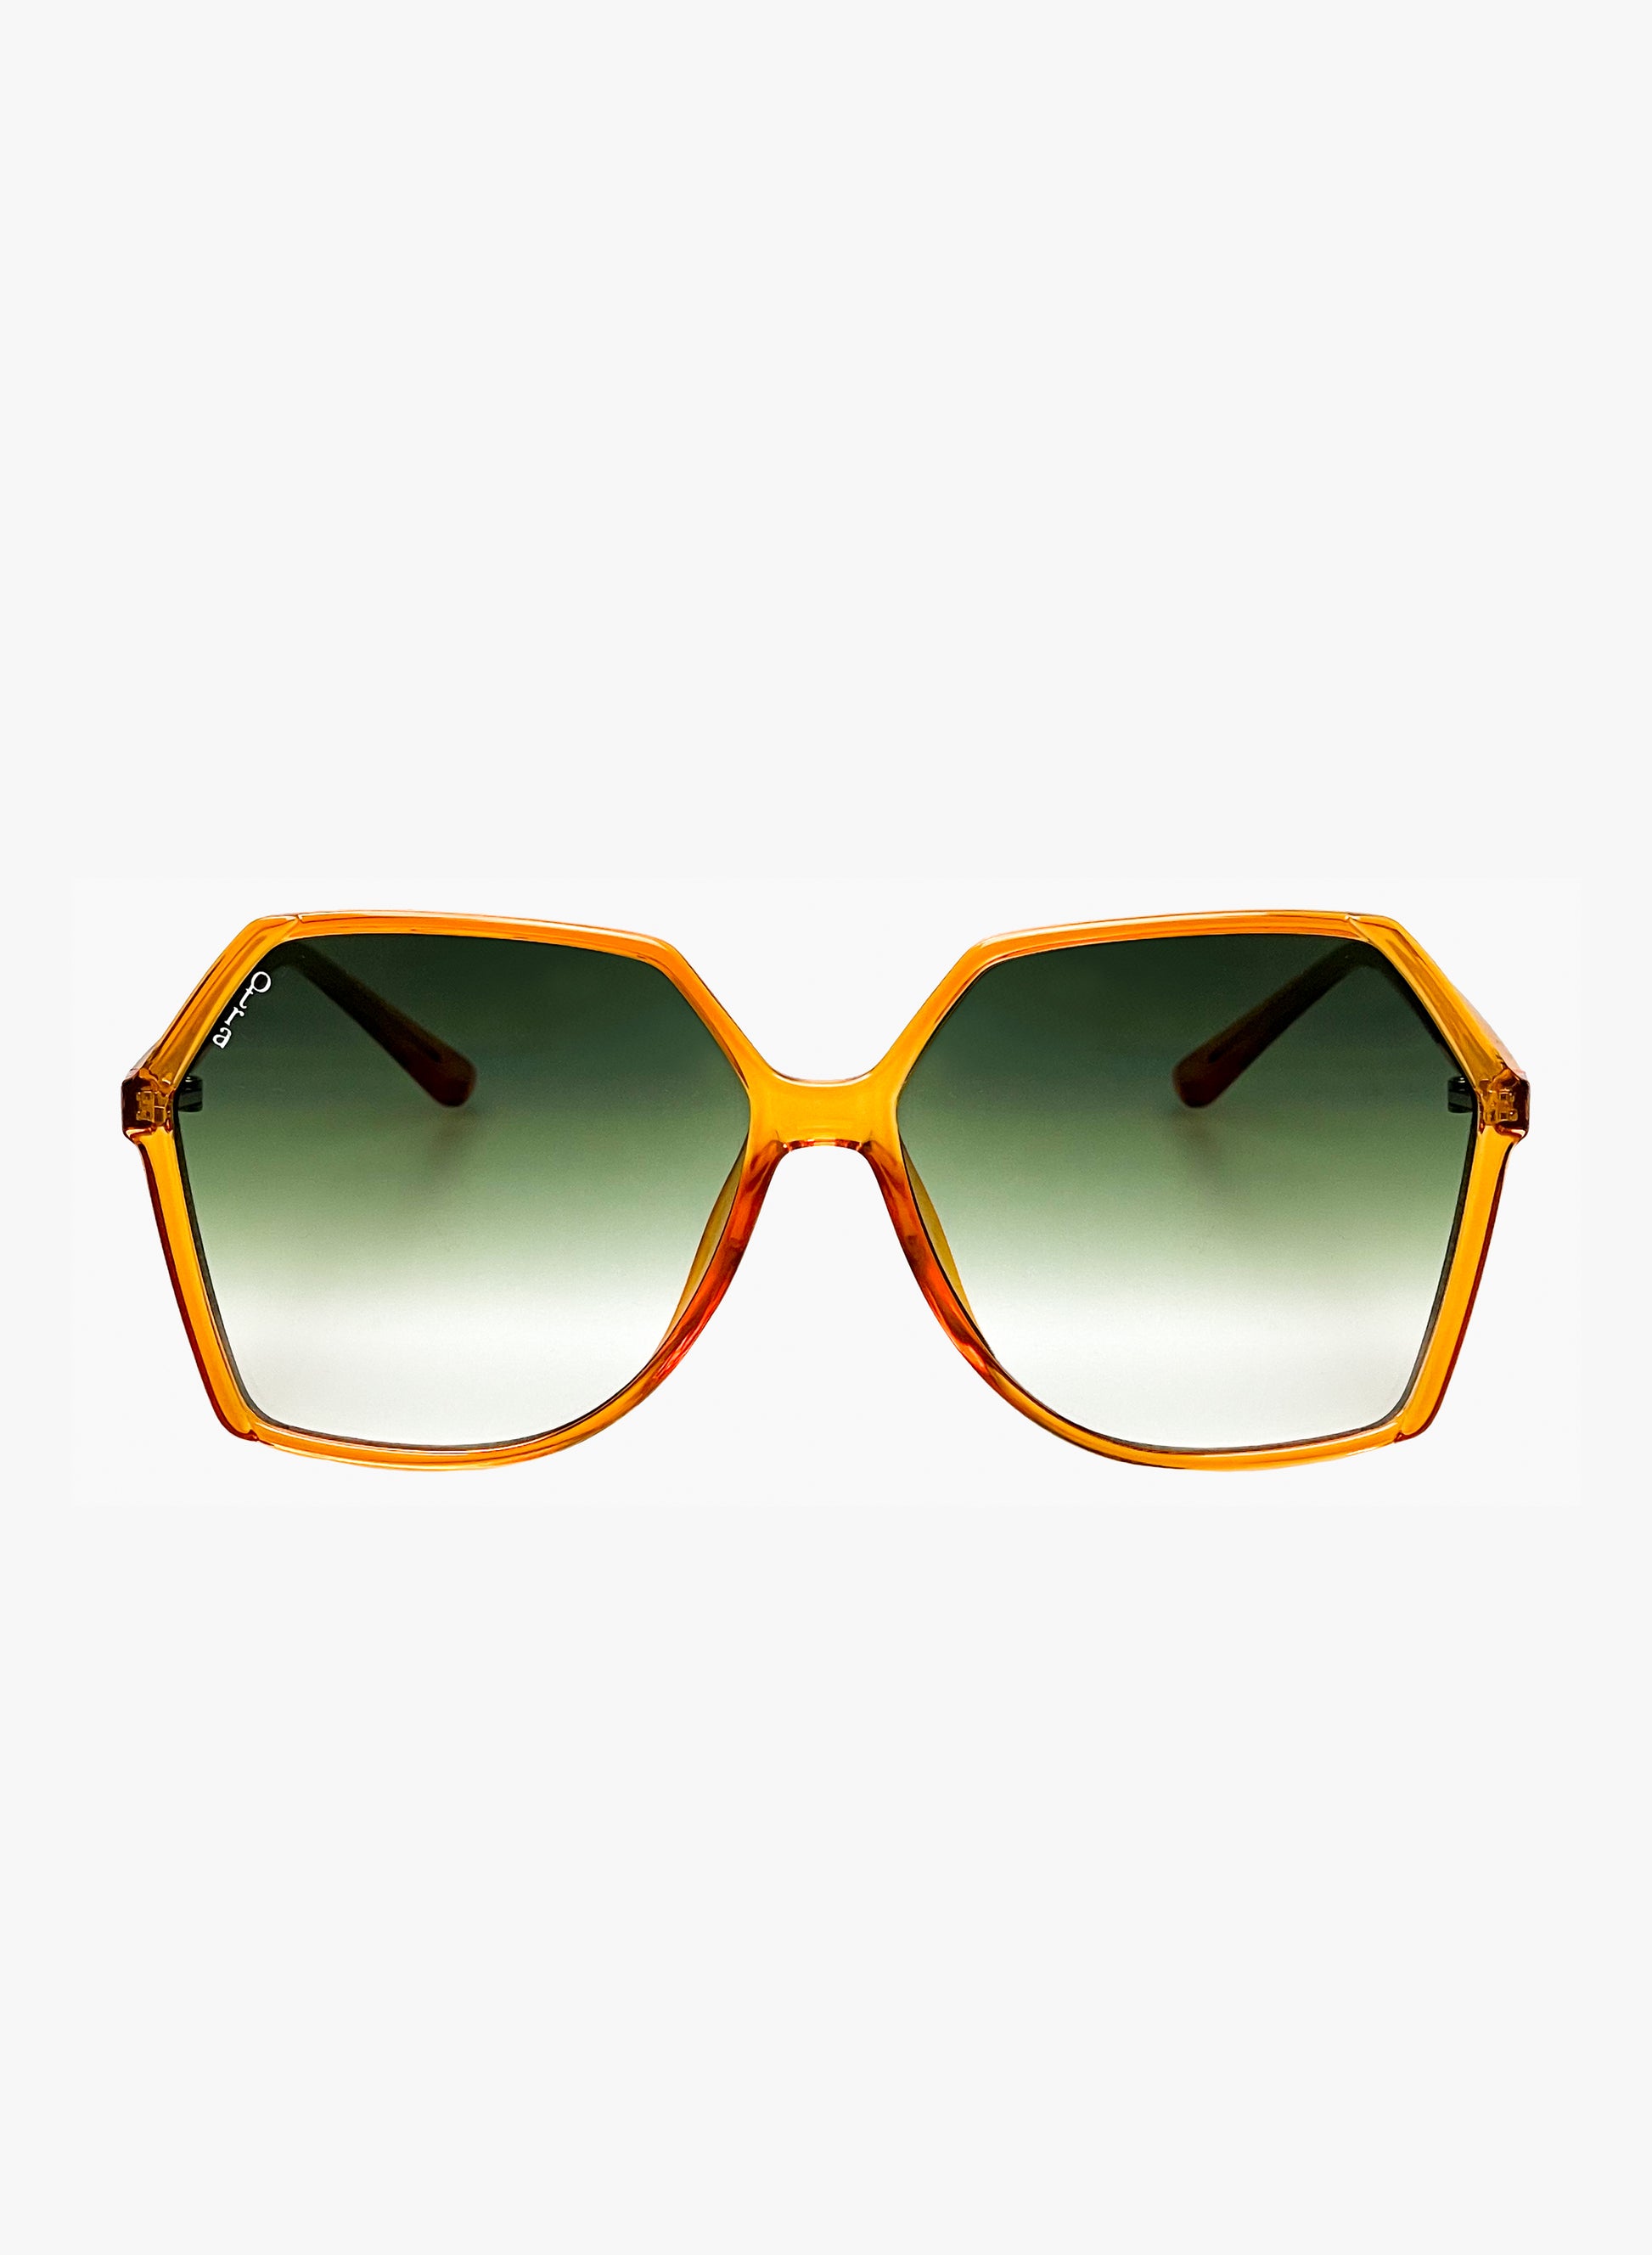 Virgo oversied mod sunglasses in gold and green